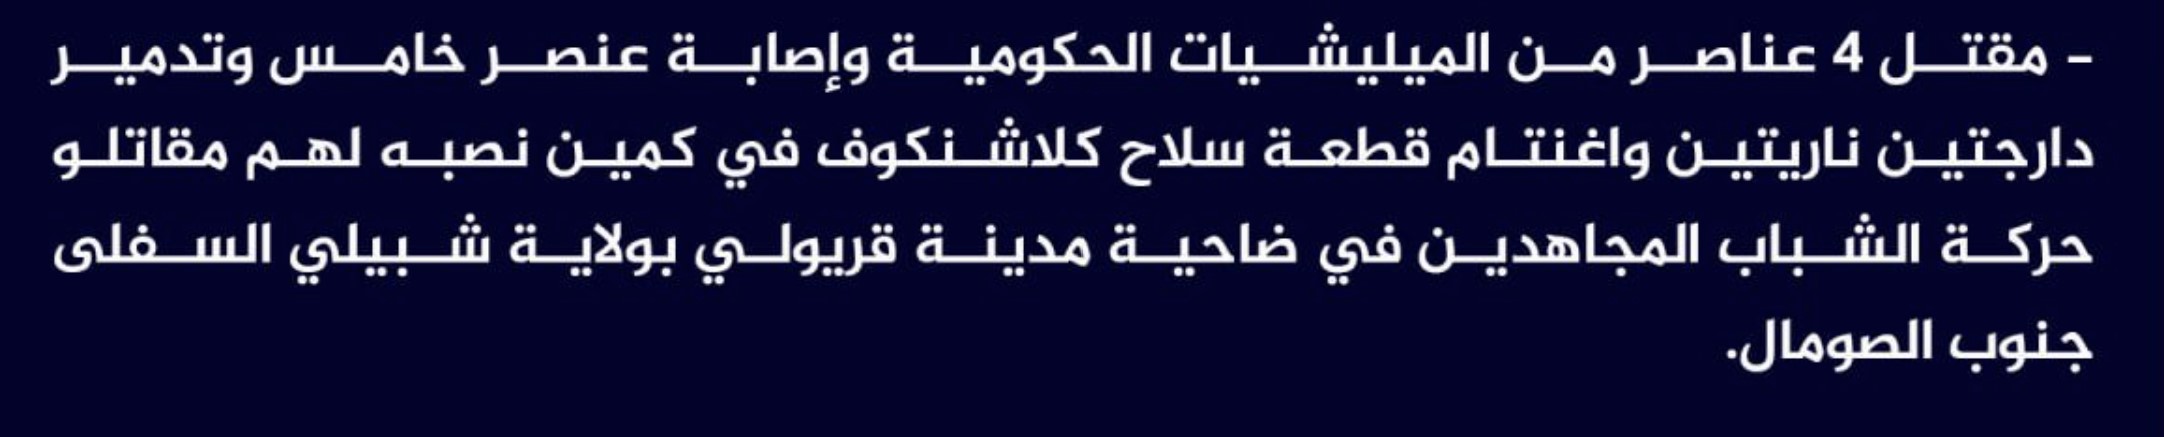 (Claim) al-Shabaab Killed Four Somalian Forces, Injured Another, Destroyed Two Motorcycles, and Seized a Kalashnikov in an Ambush in Qoryoley City, Lower Shabelle, Somalia - 28 September 2023